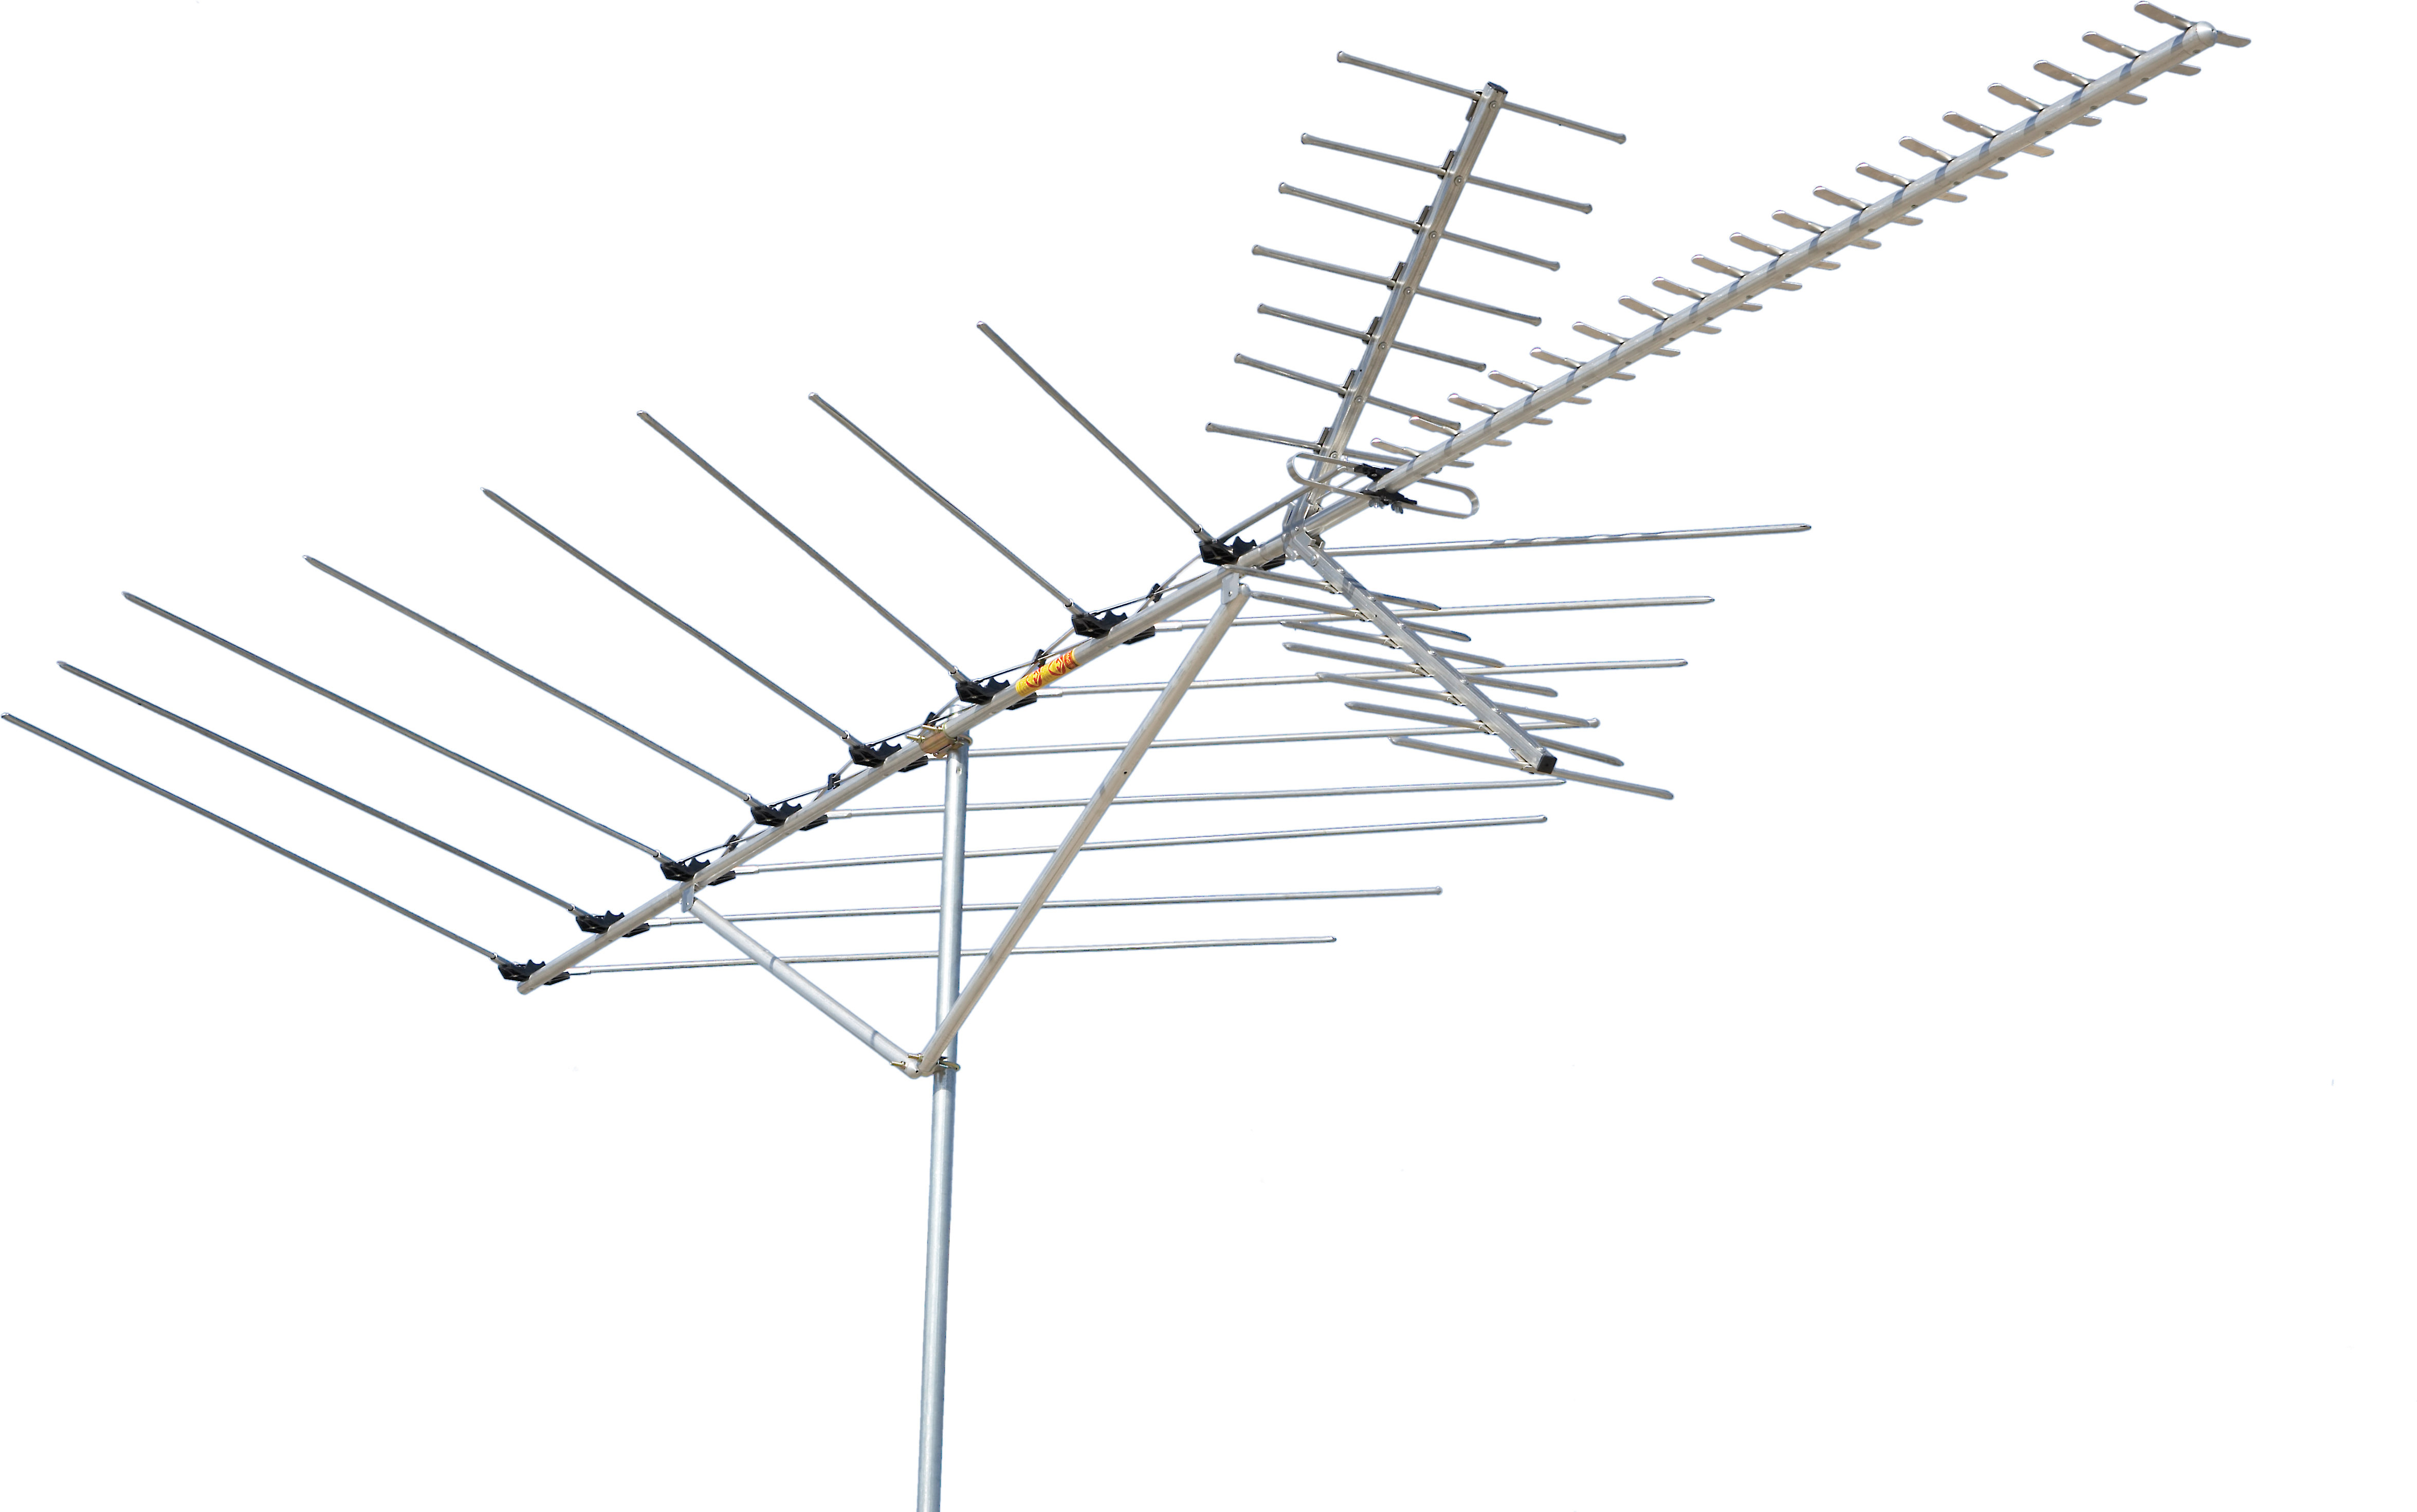 Amazon.com: Channel Master ULTRAtenna Outdoor TV Antenna Multi-Directional  180° Reception for Roof, Attic, Eave, Chimney, Wall or Balcony - 60+ Mile  Range - CM-4221HD: Home Audio & Theater